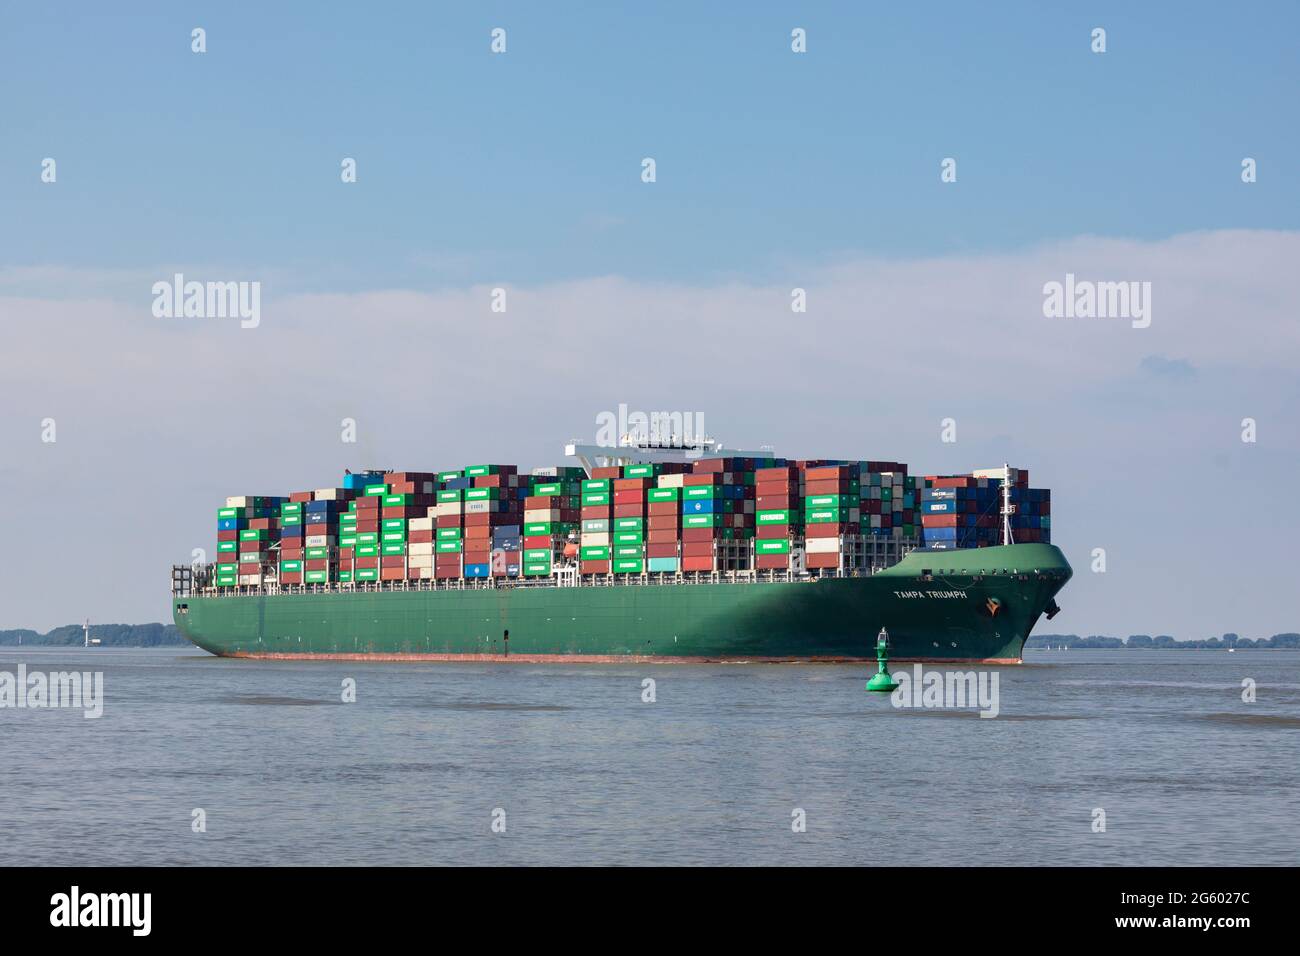 Stade, Germany - June 25, 2021: Container ship TAMPA TRIUMPH, owned by Costamare and operated by Evergreen Marine, on Elbe river heading to Hamburg Stock Photo